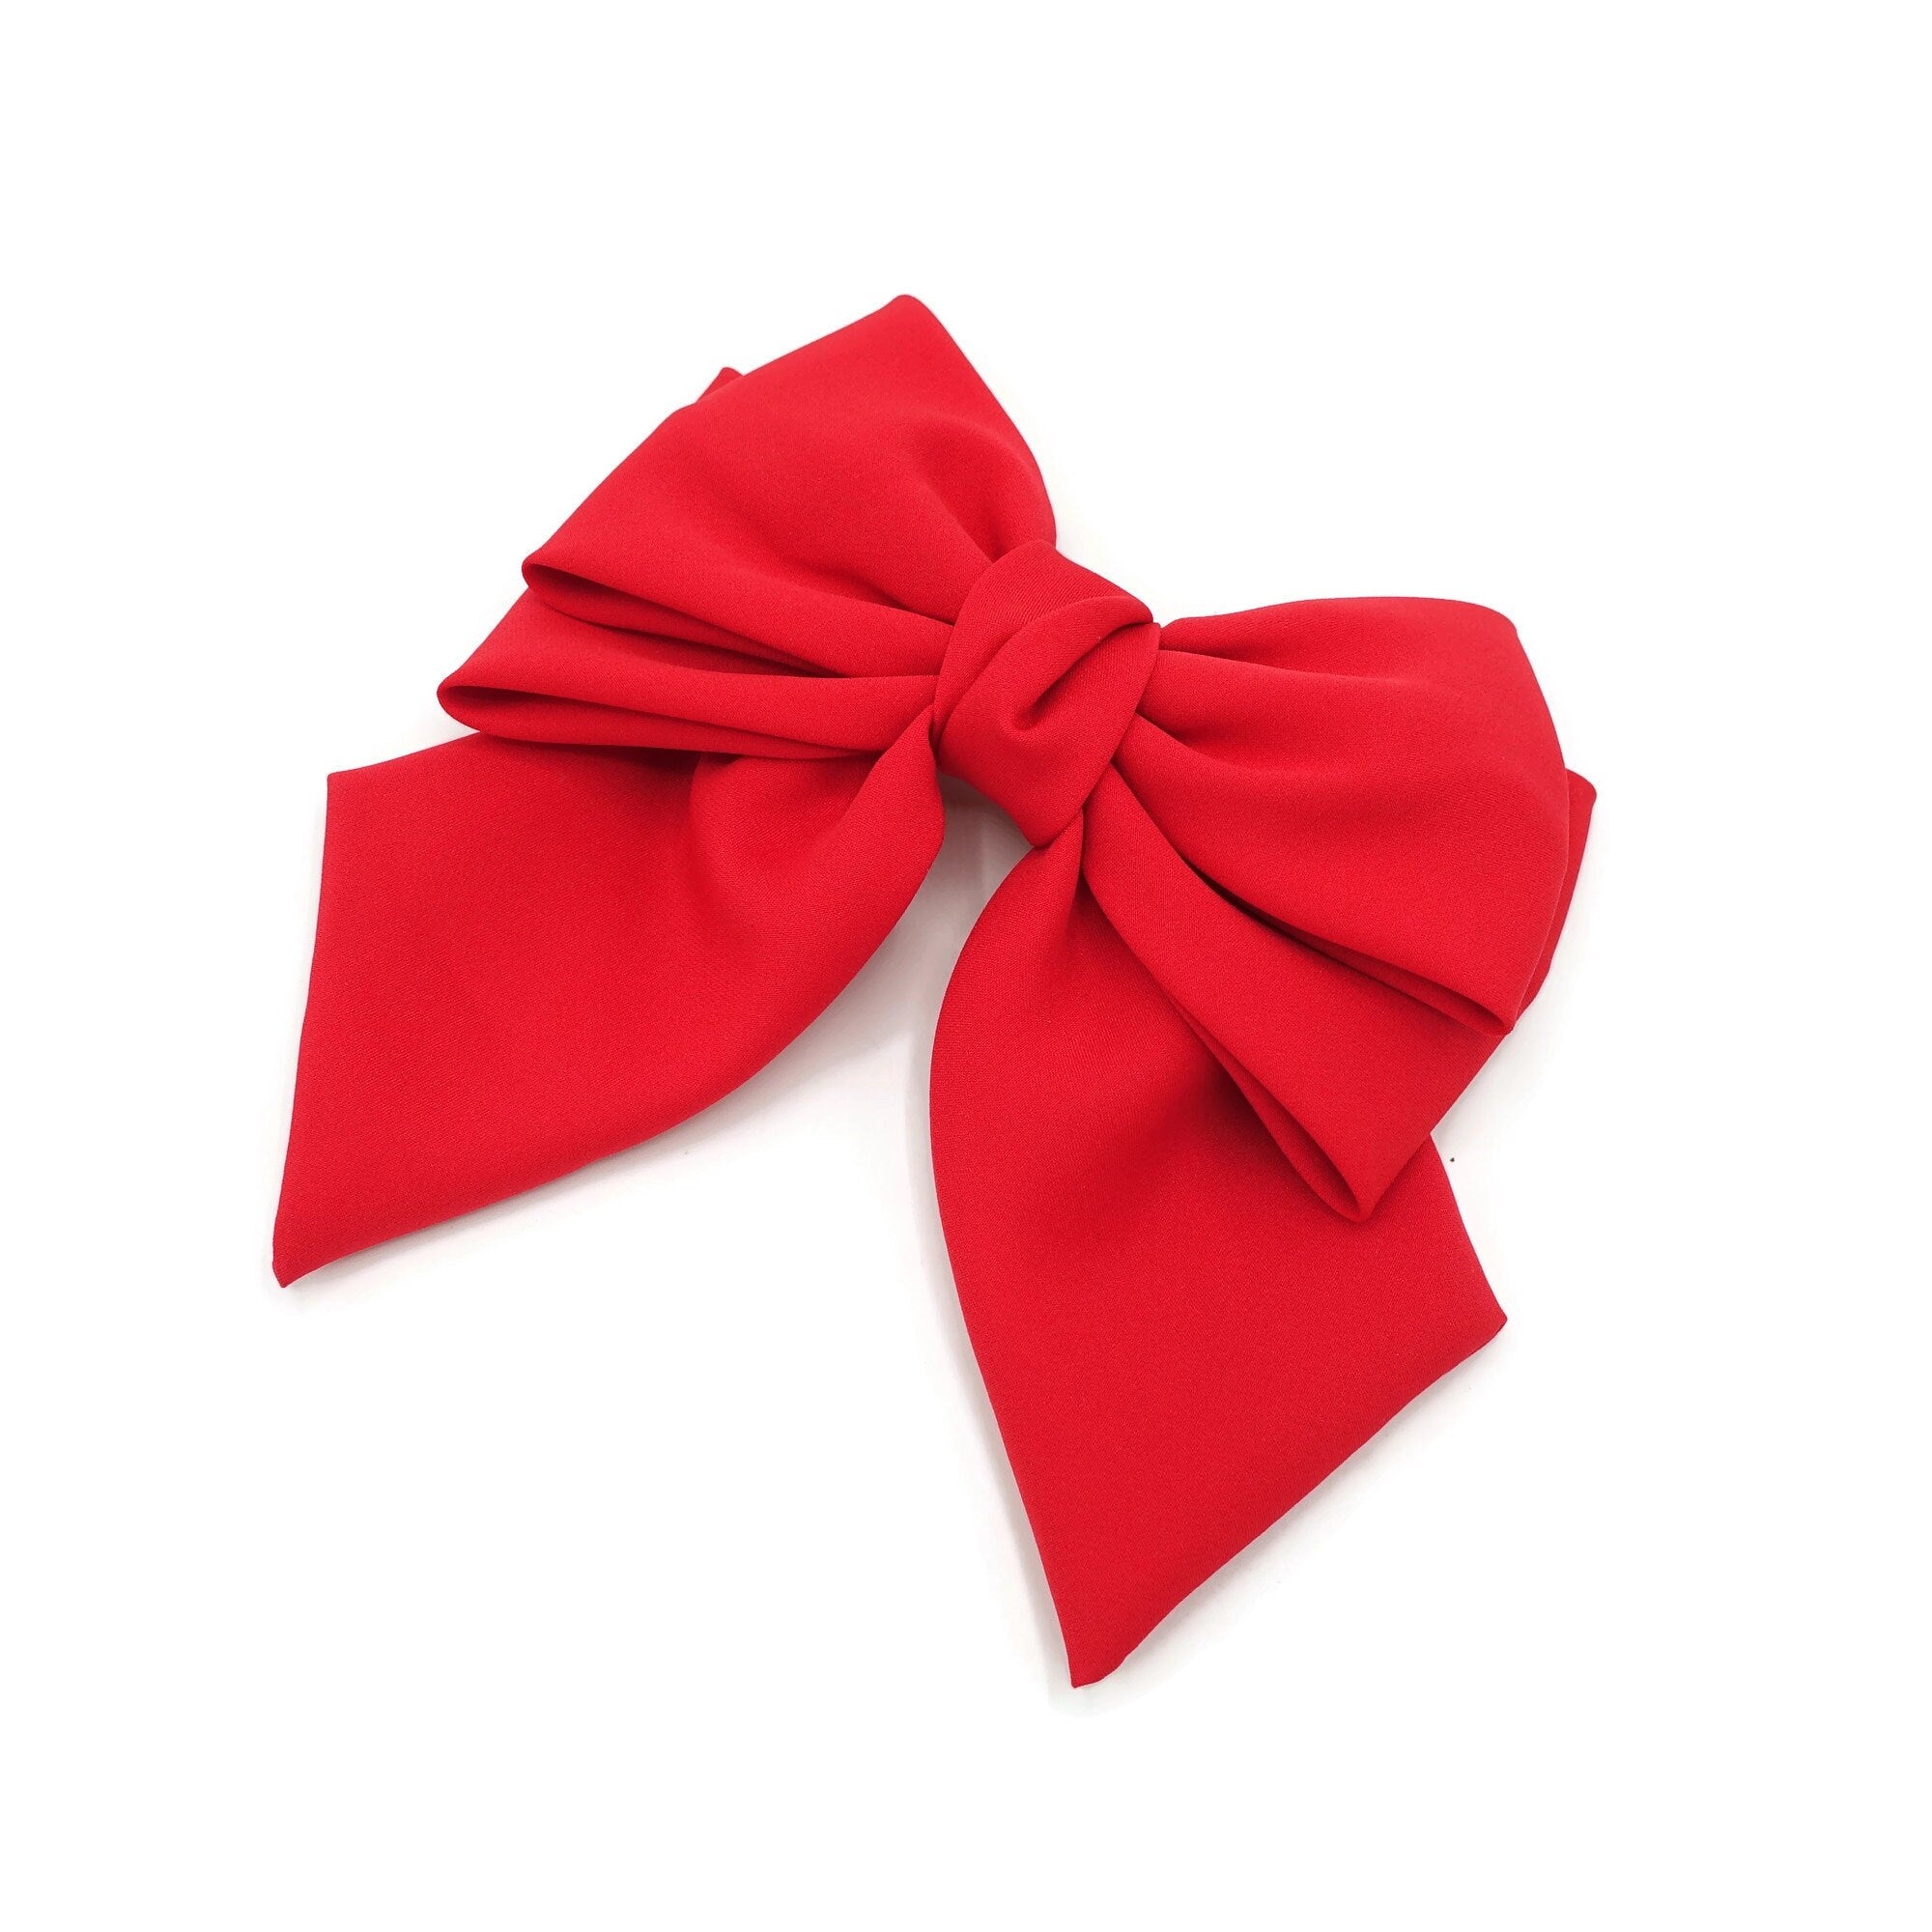 veryshine.com Barrette (Bow) thick double layered tail hair bow chiffon hair barrette for women